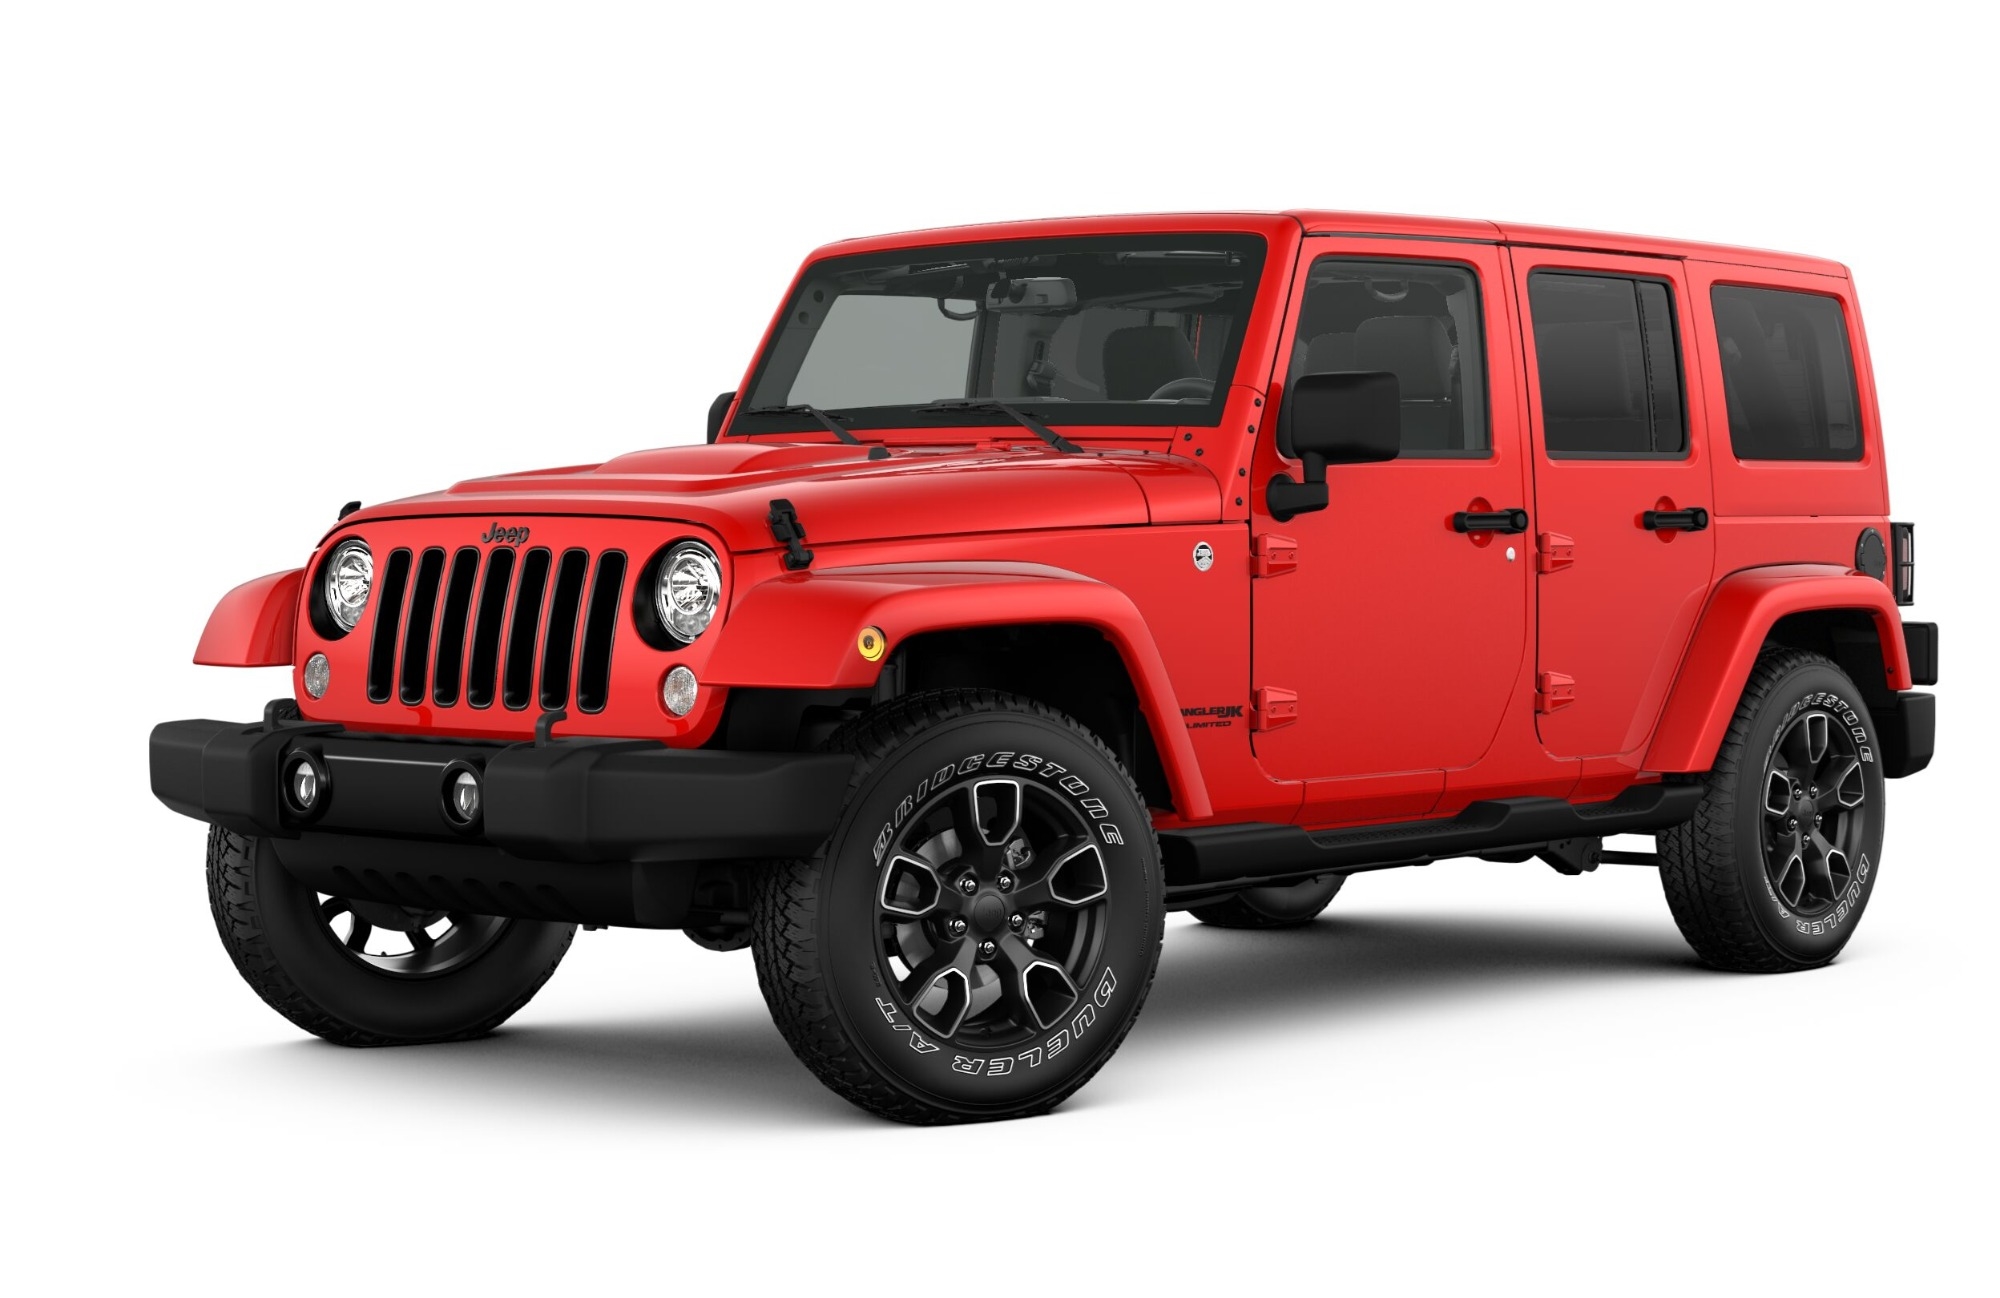 2018 Jeep Wrangler Unlimited JK Altitude Full Specs, Features and Price |  CarBuzz